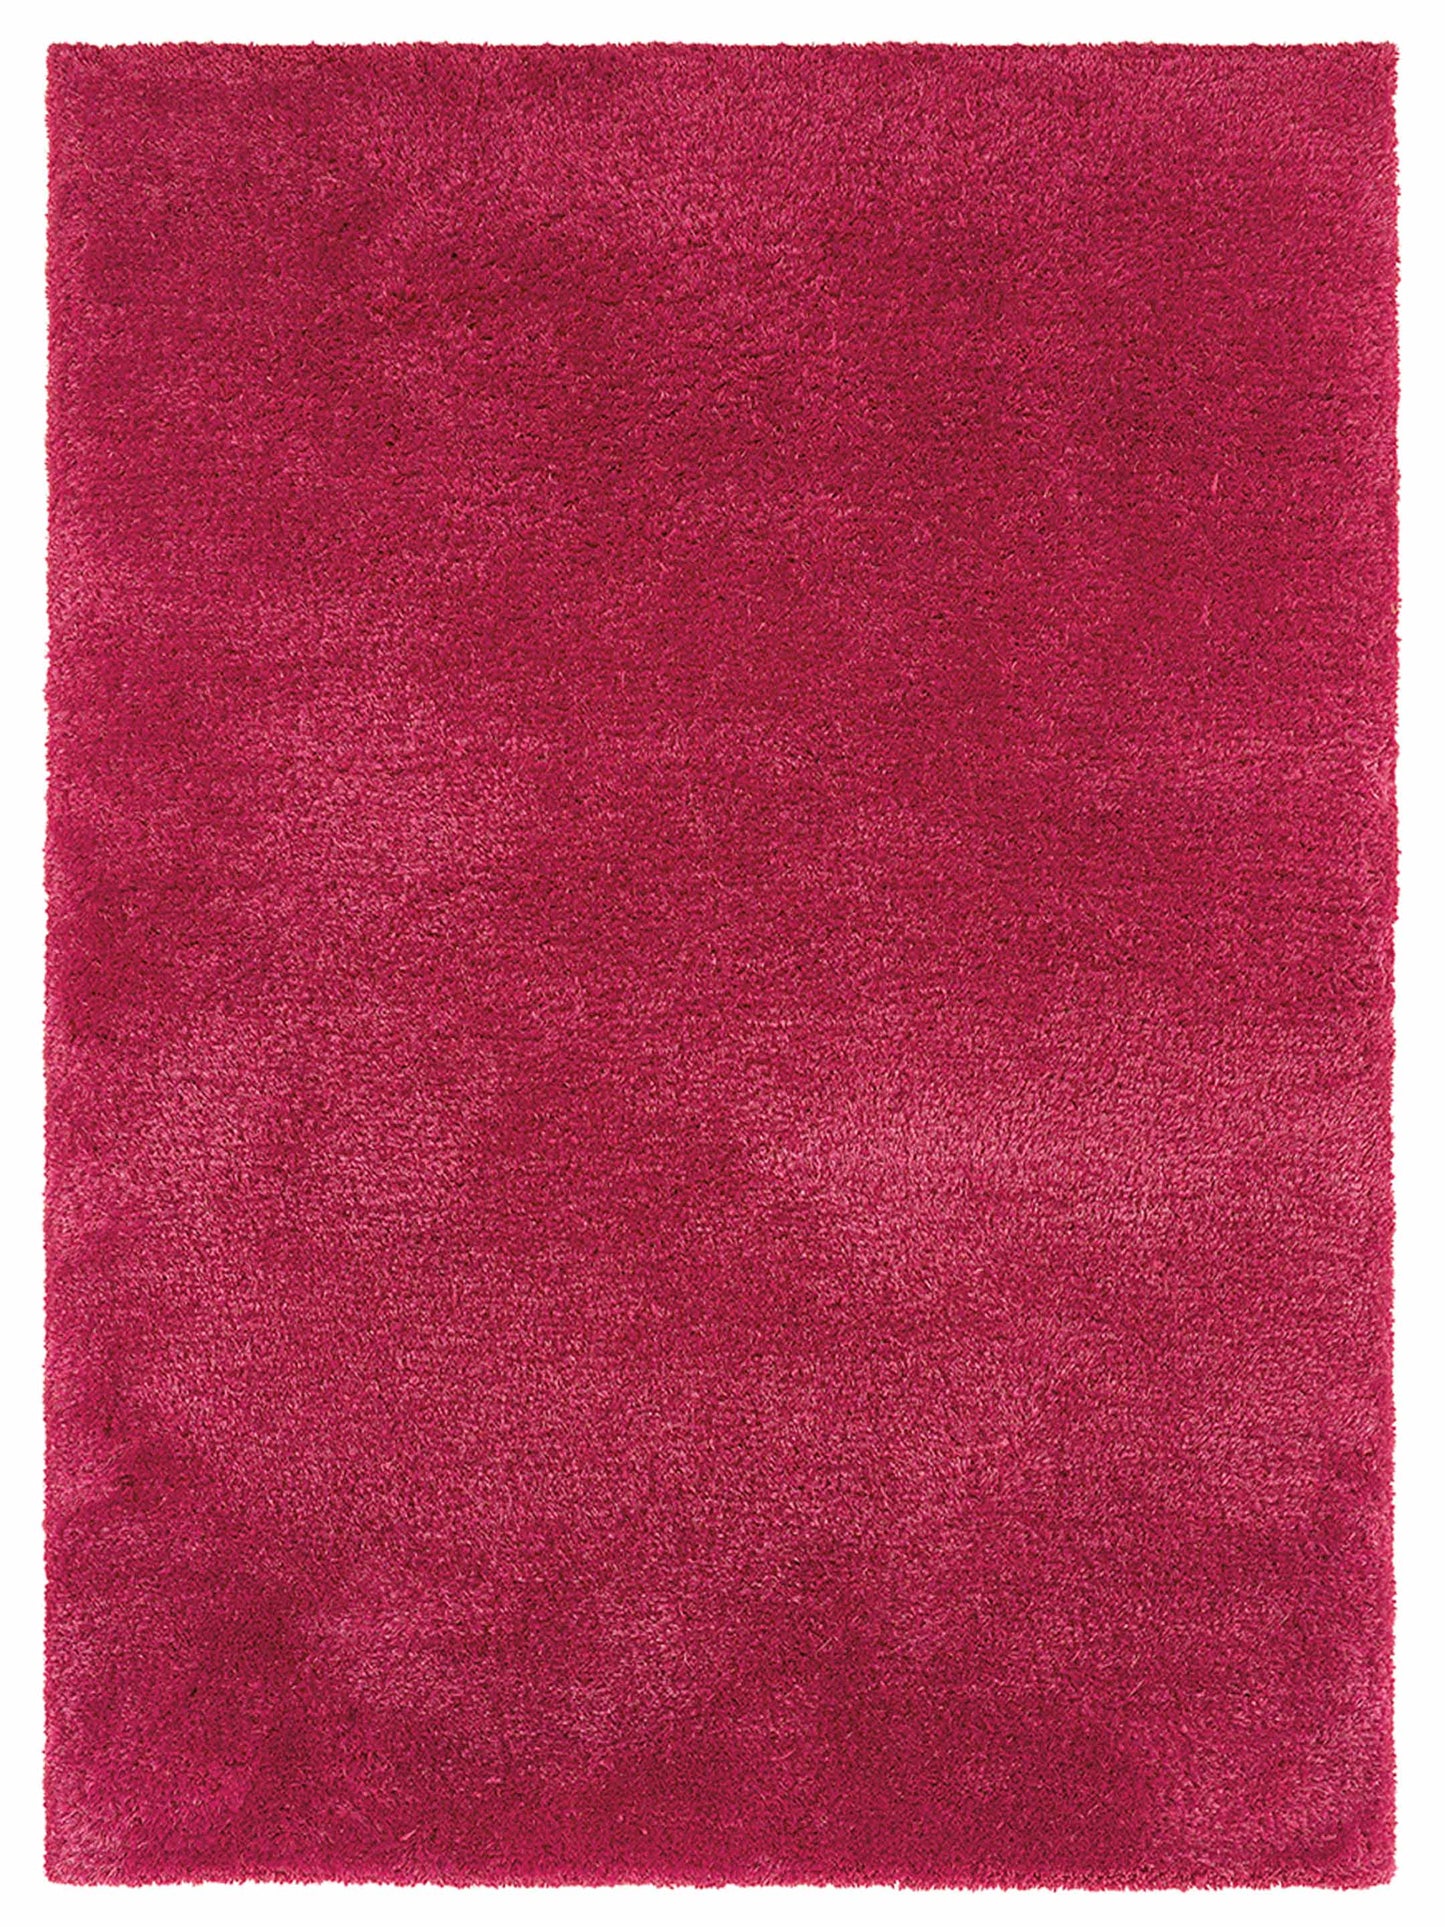 Oriental Weavers COSMO 81103 Pink Shag Tufted Rug